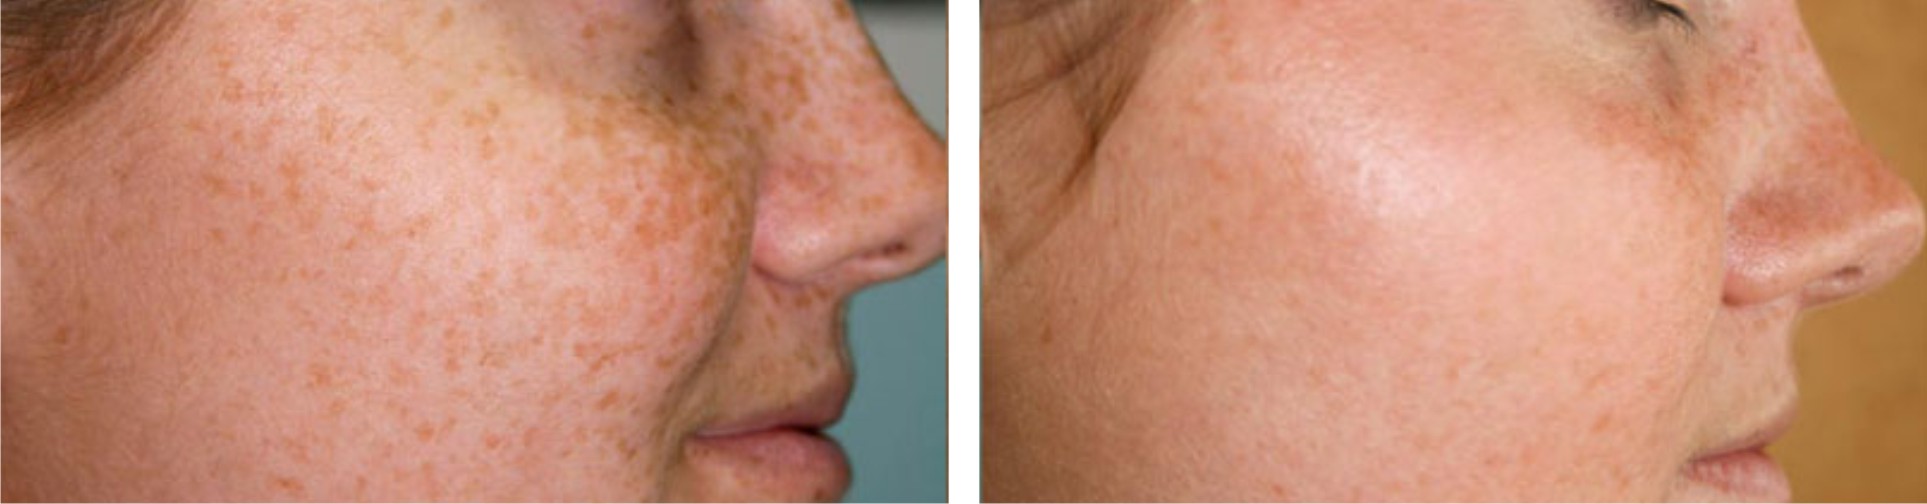 Laser Freckle Removal Image Three